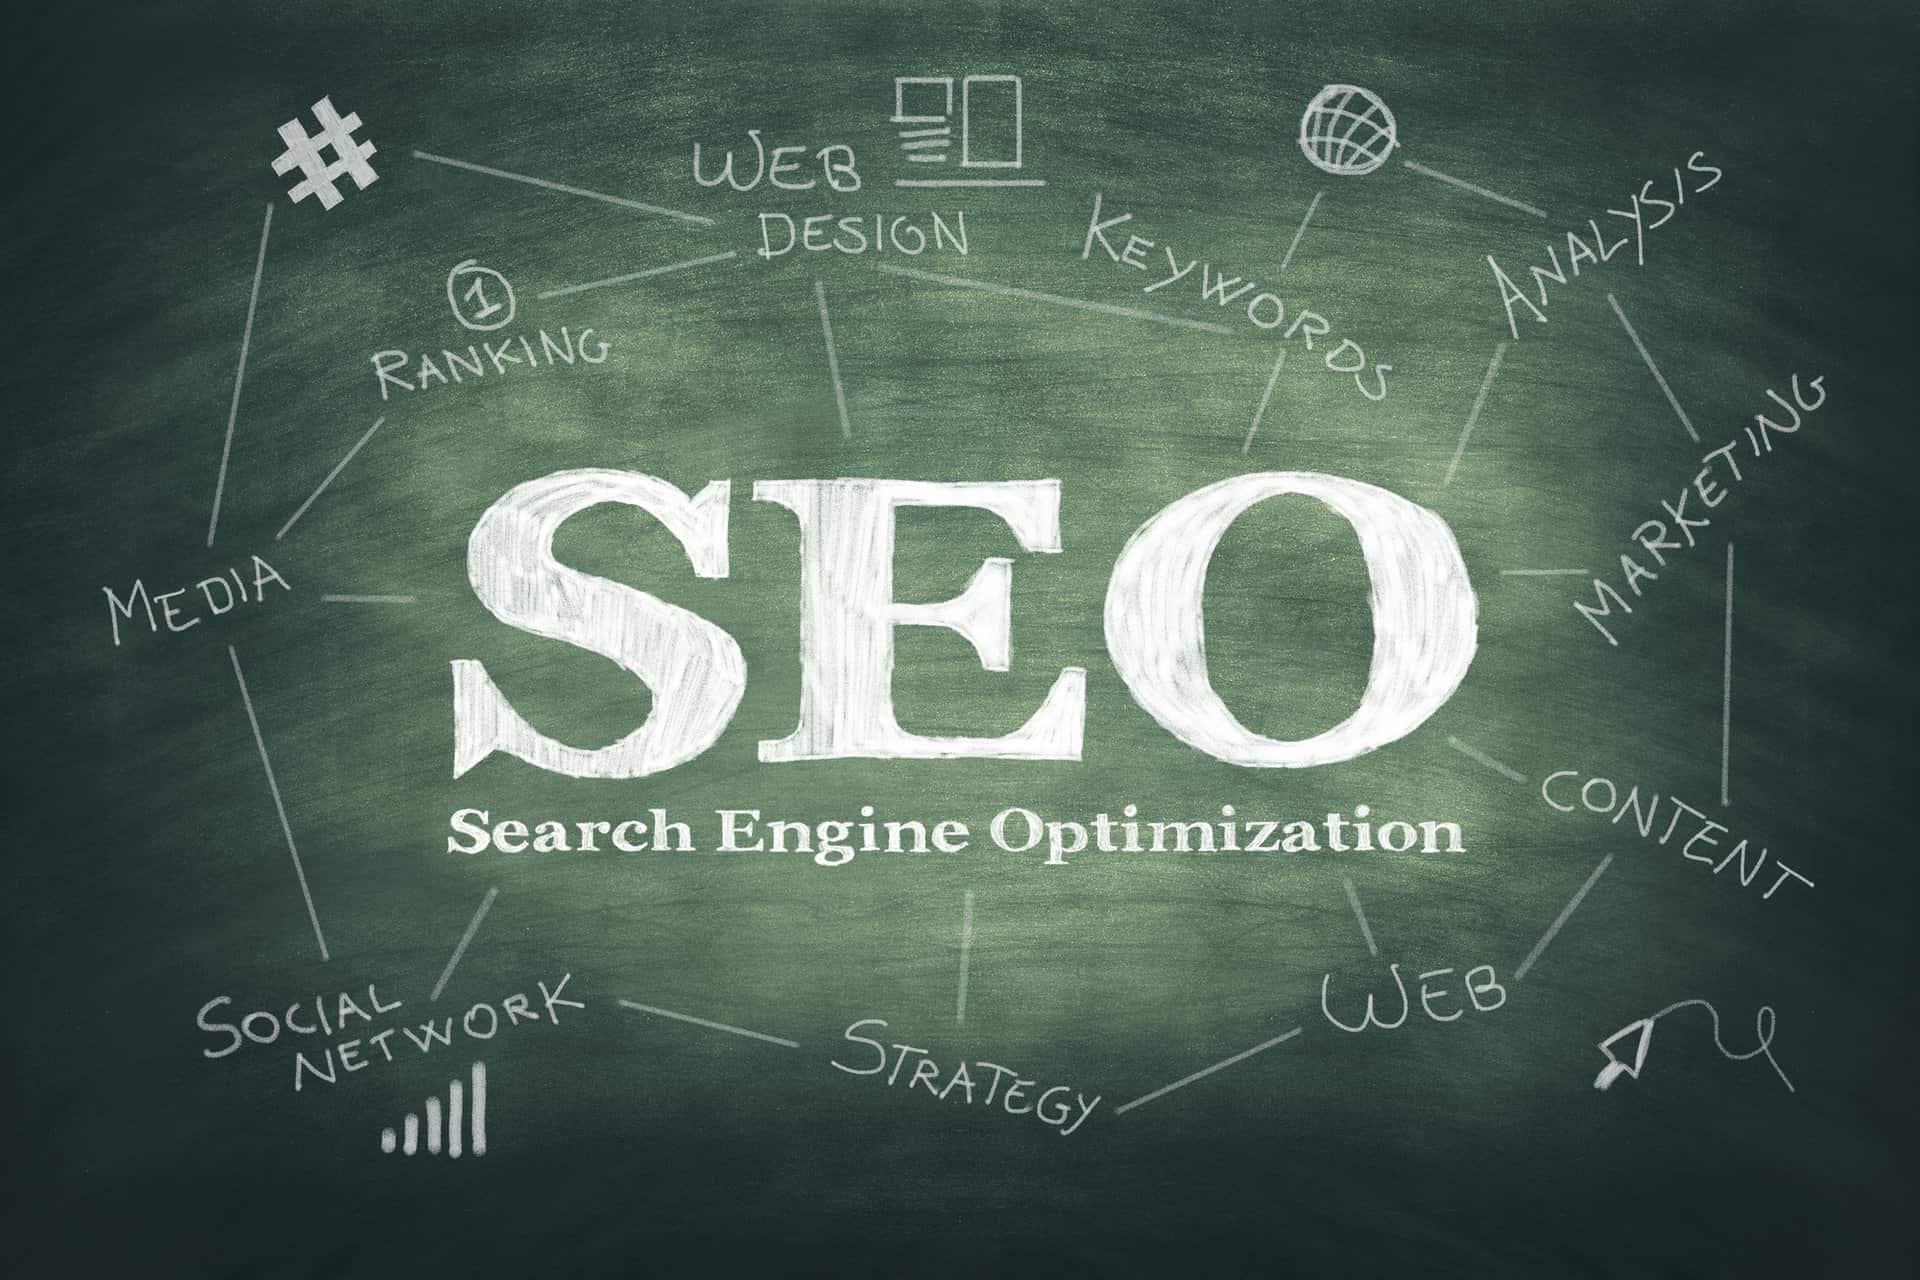 what does an seo company do